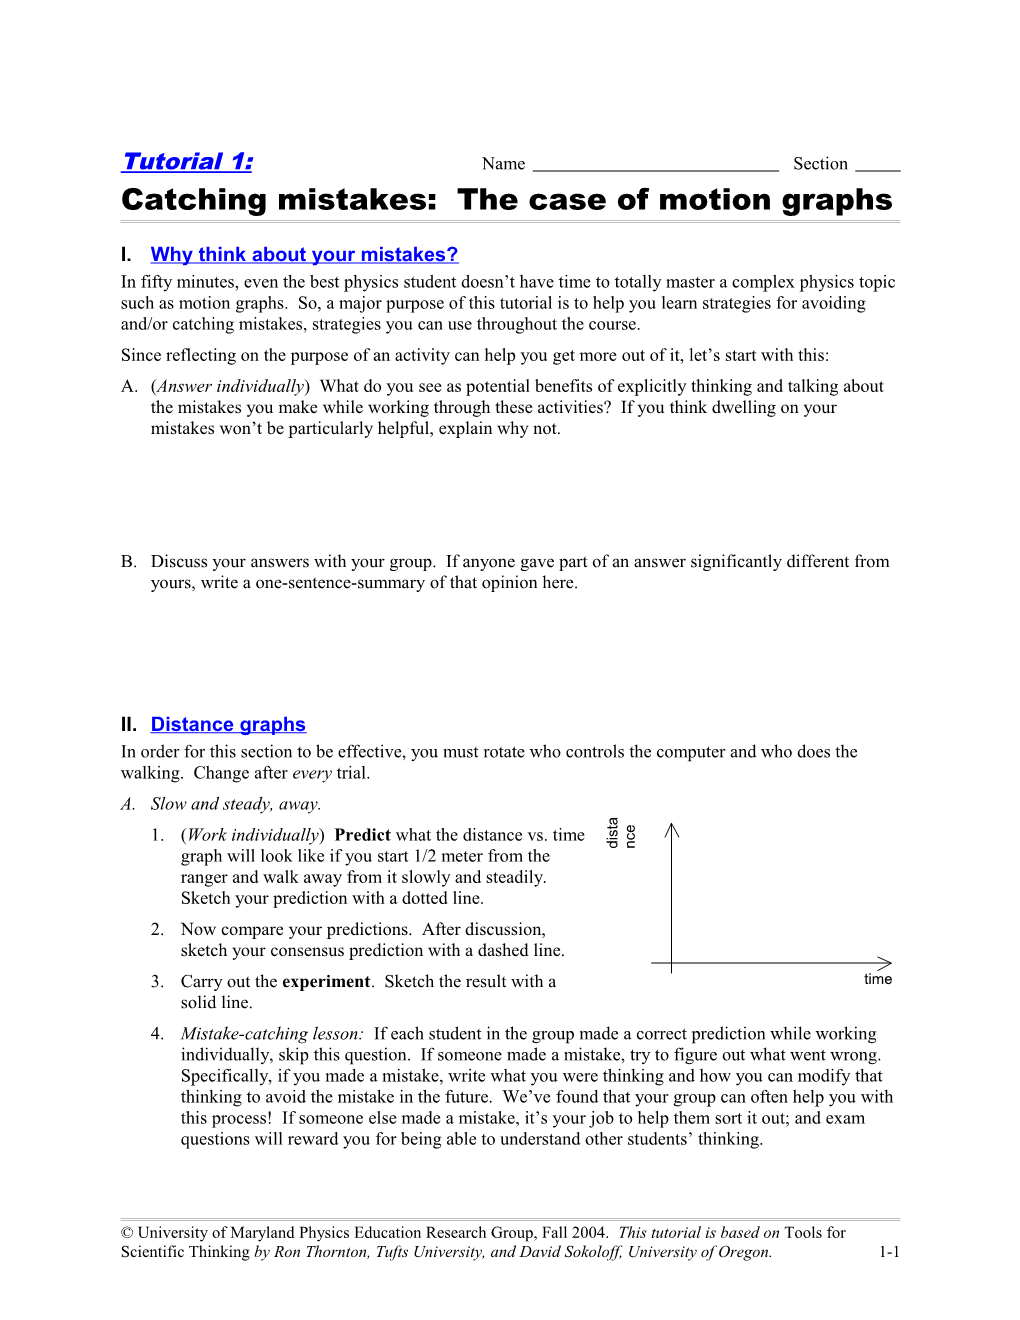 Catching Mistakes: the Case of Motion Graphs